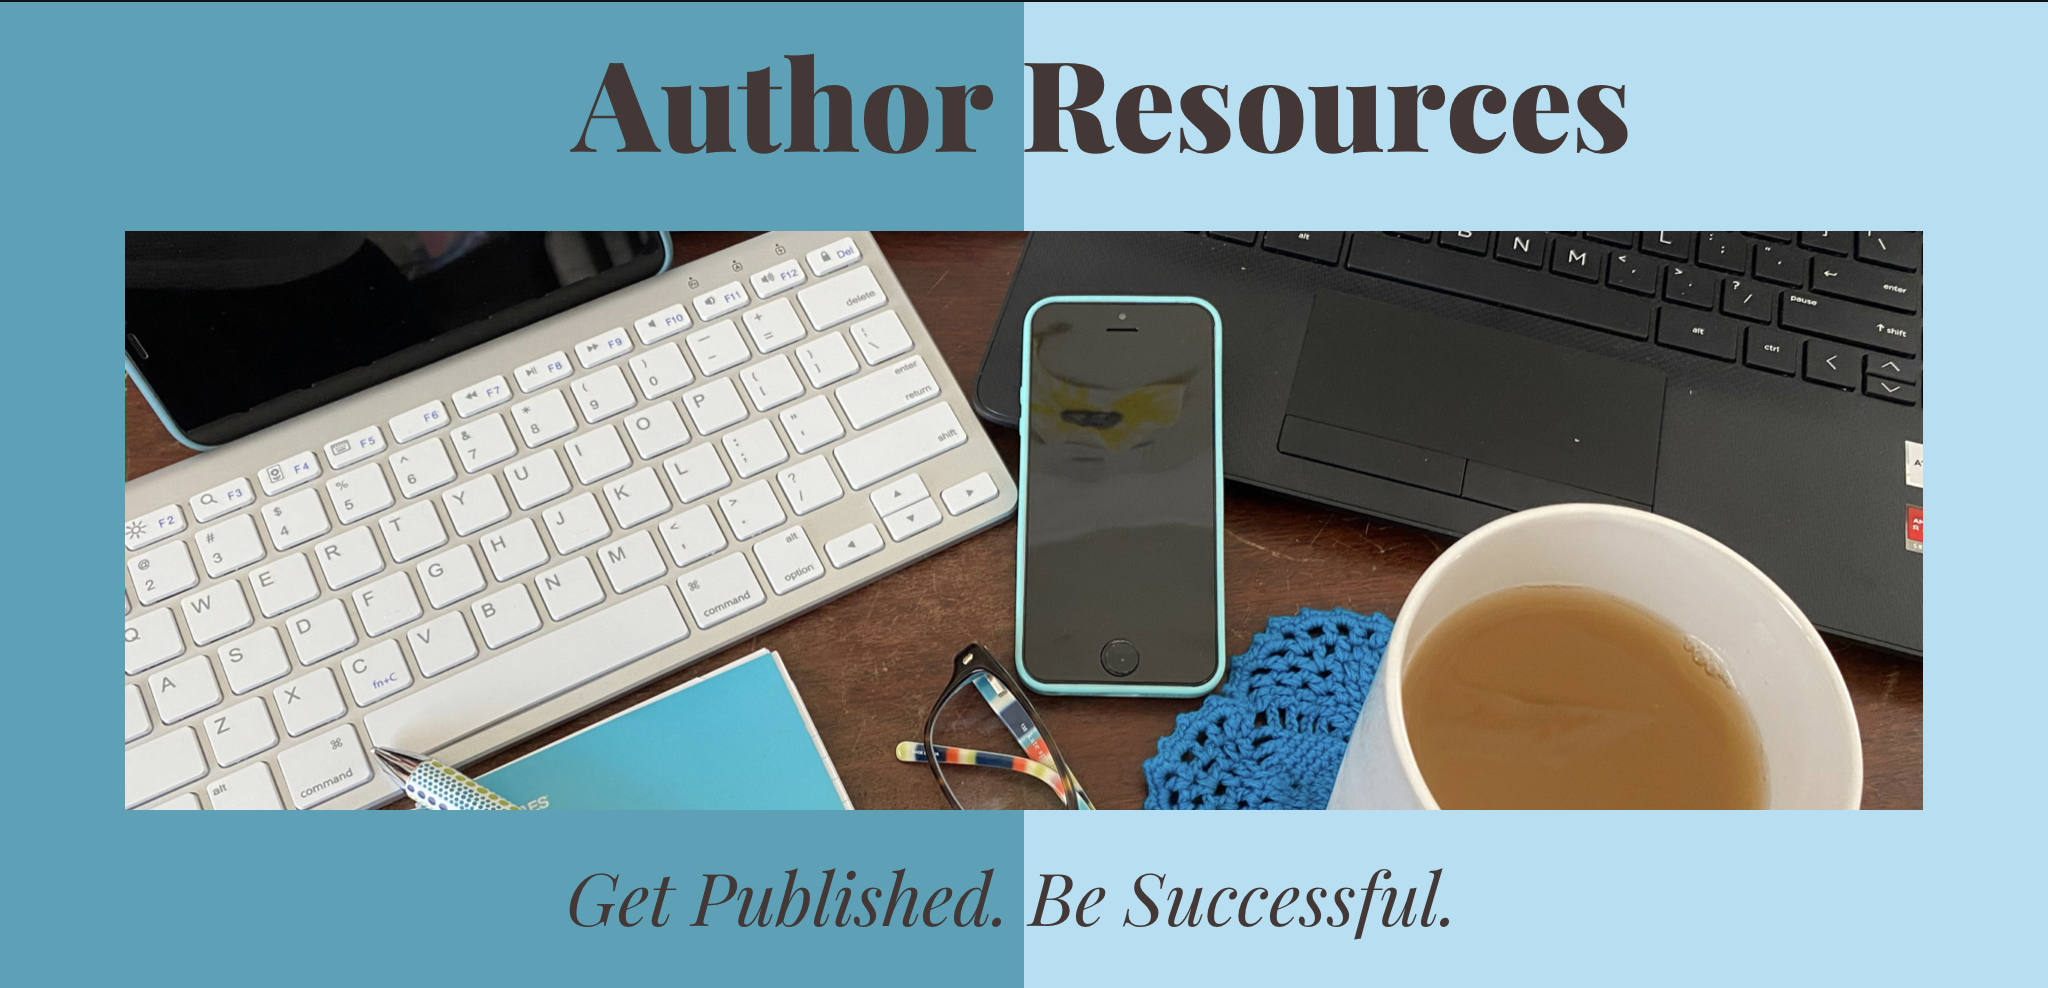 Author Resources to get published